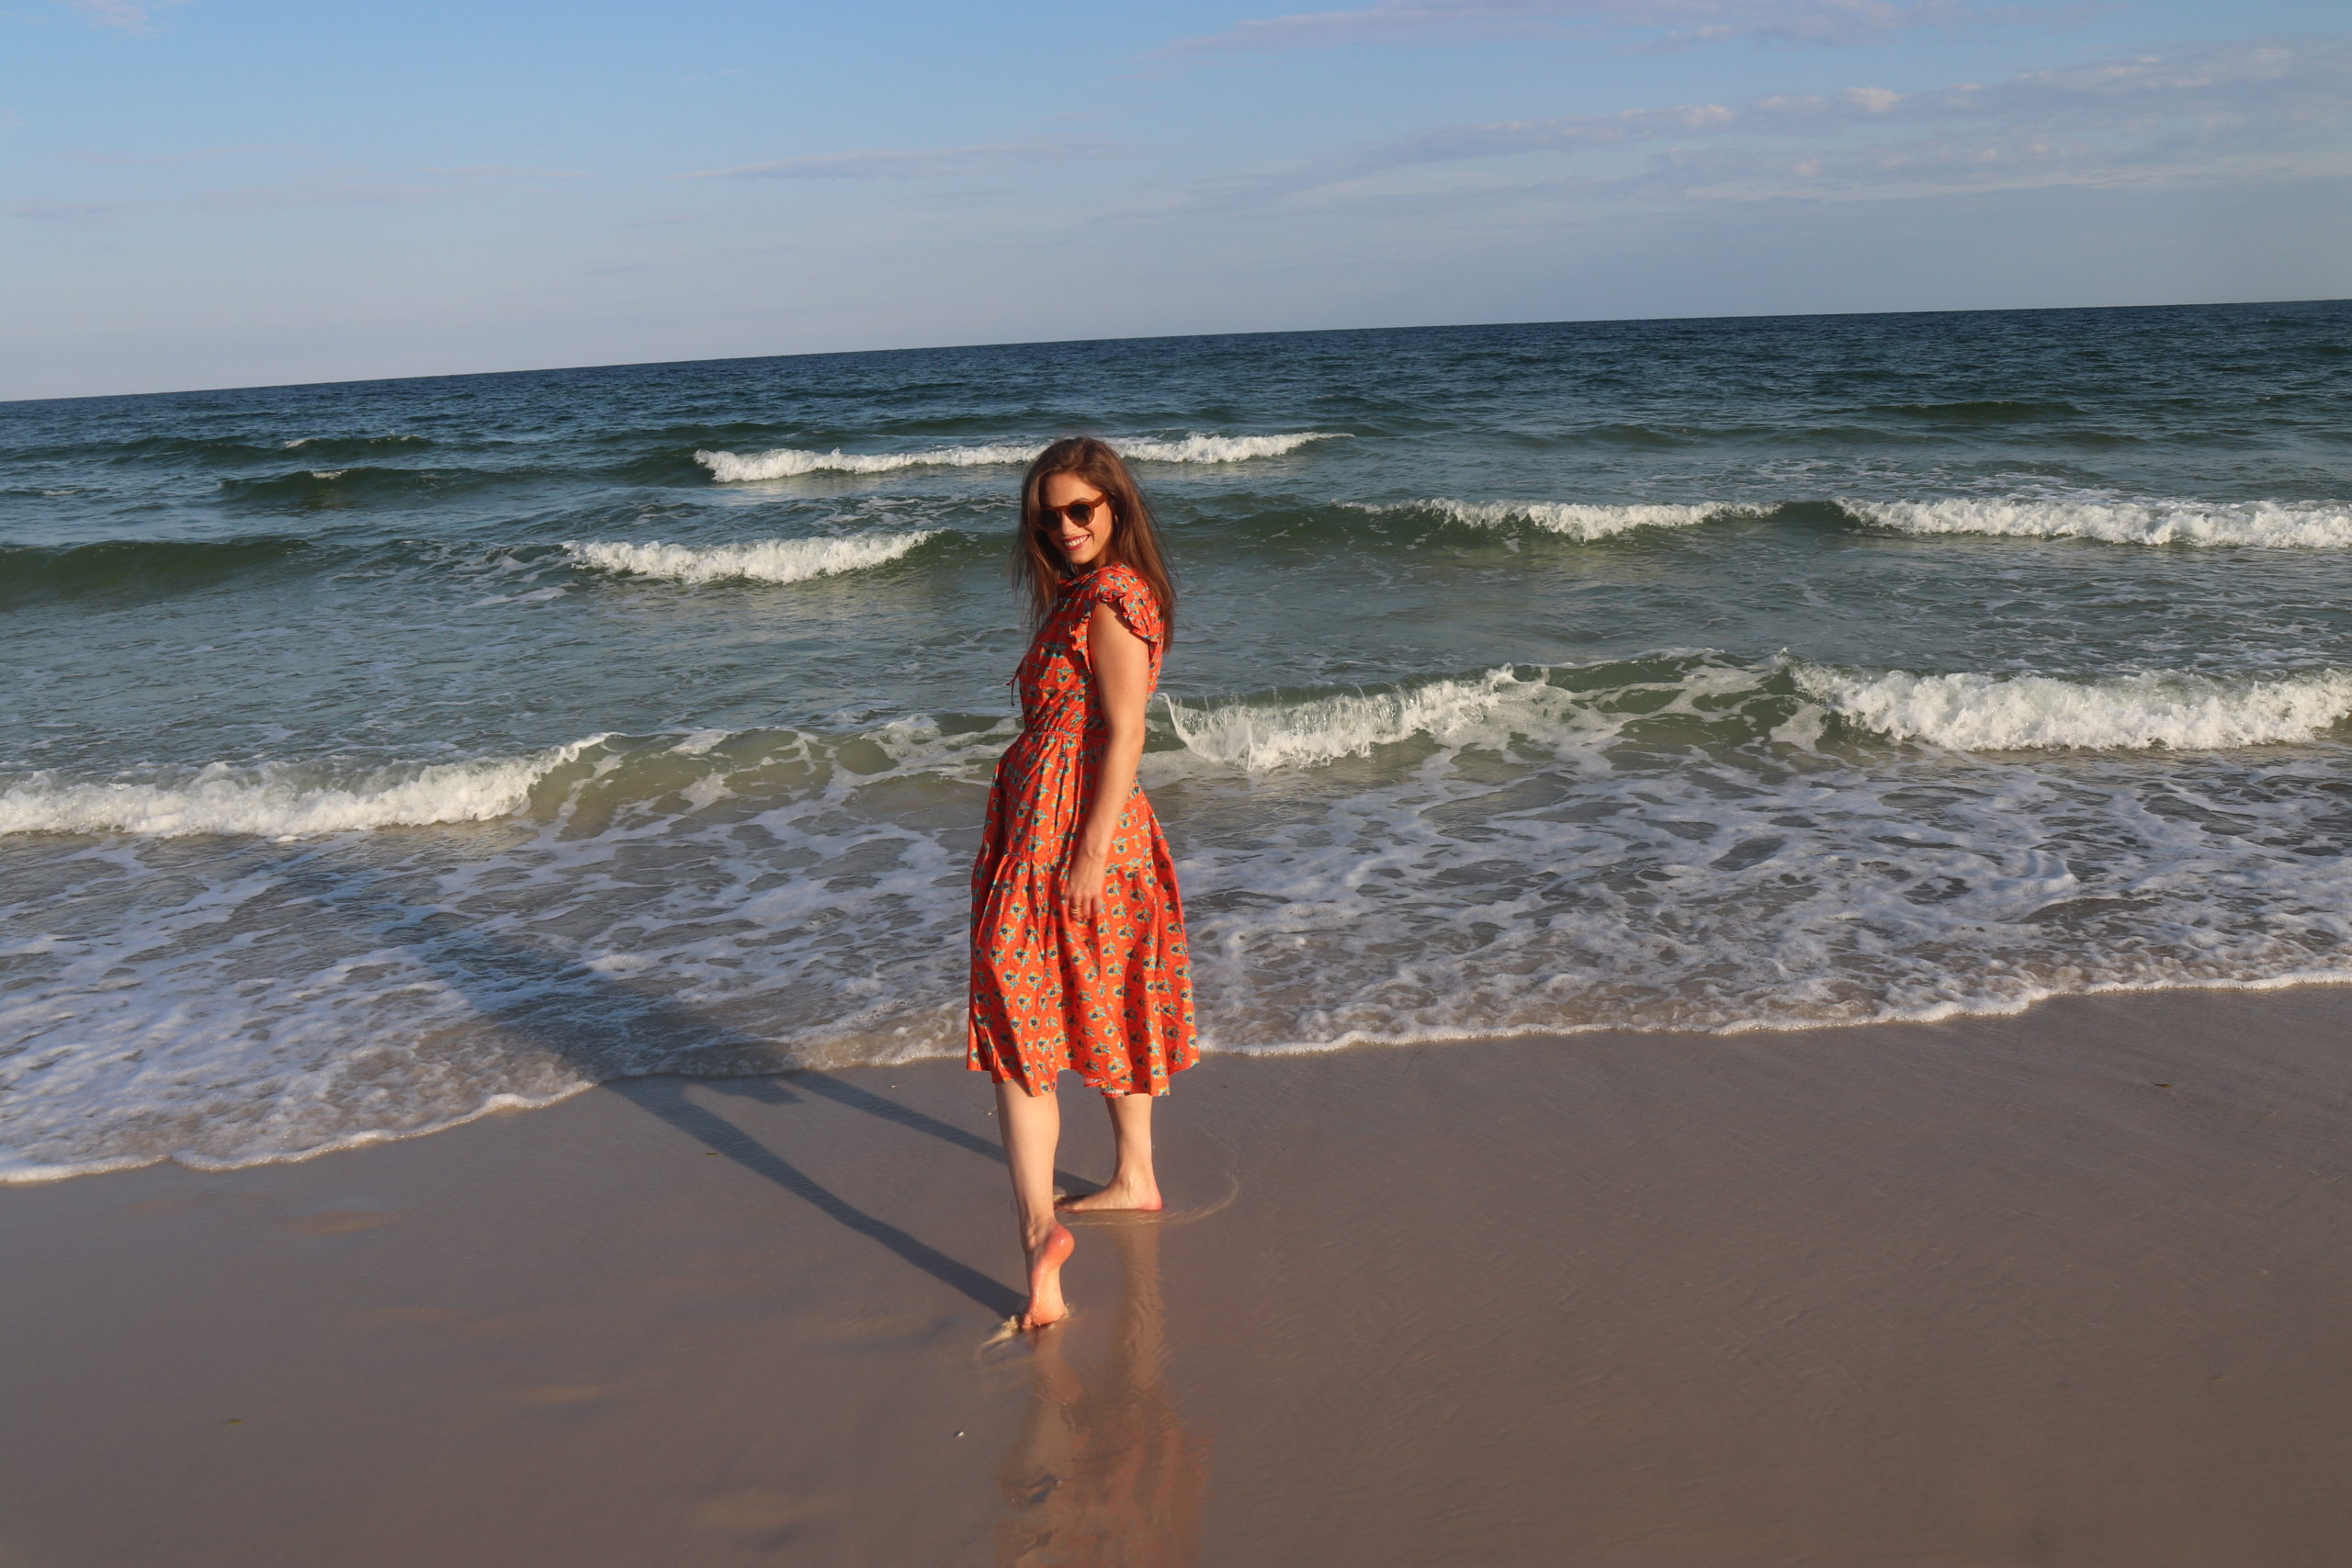 Girl in an orange dress with brown hair on the beach barefoot